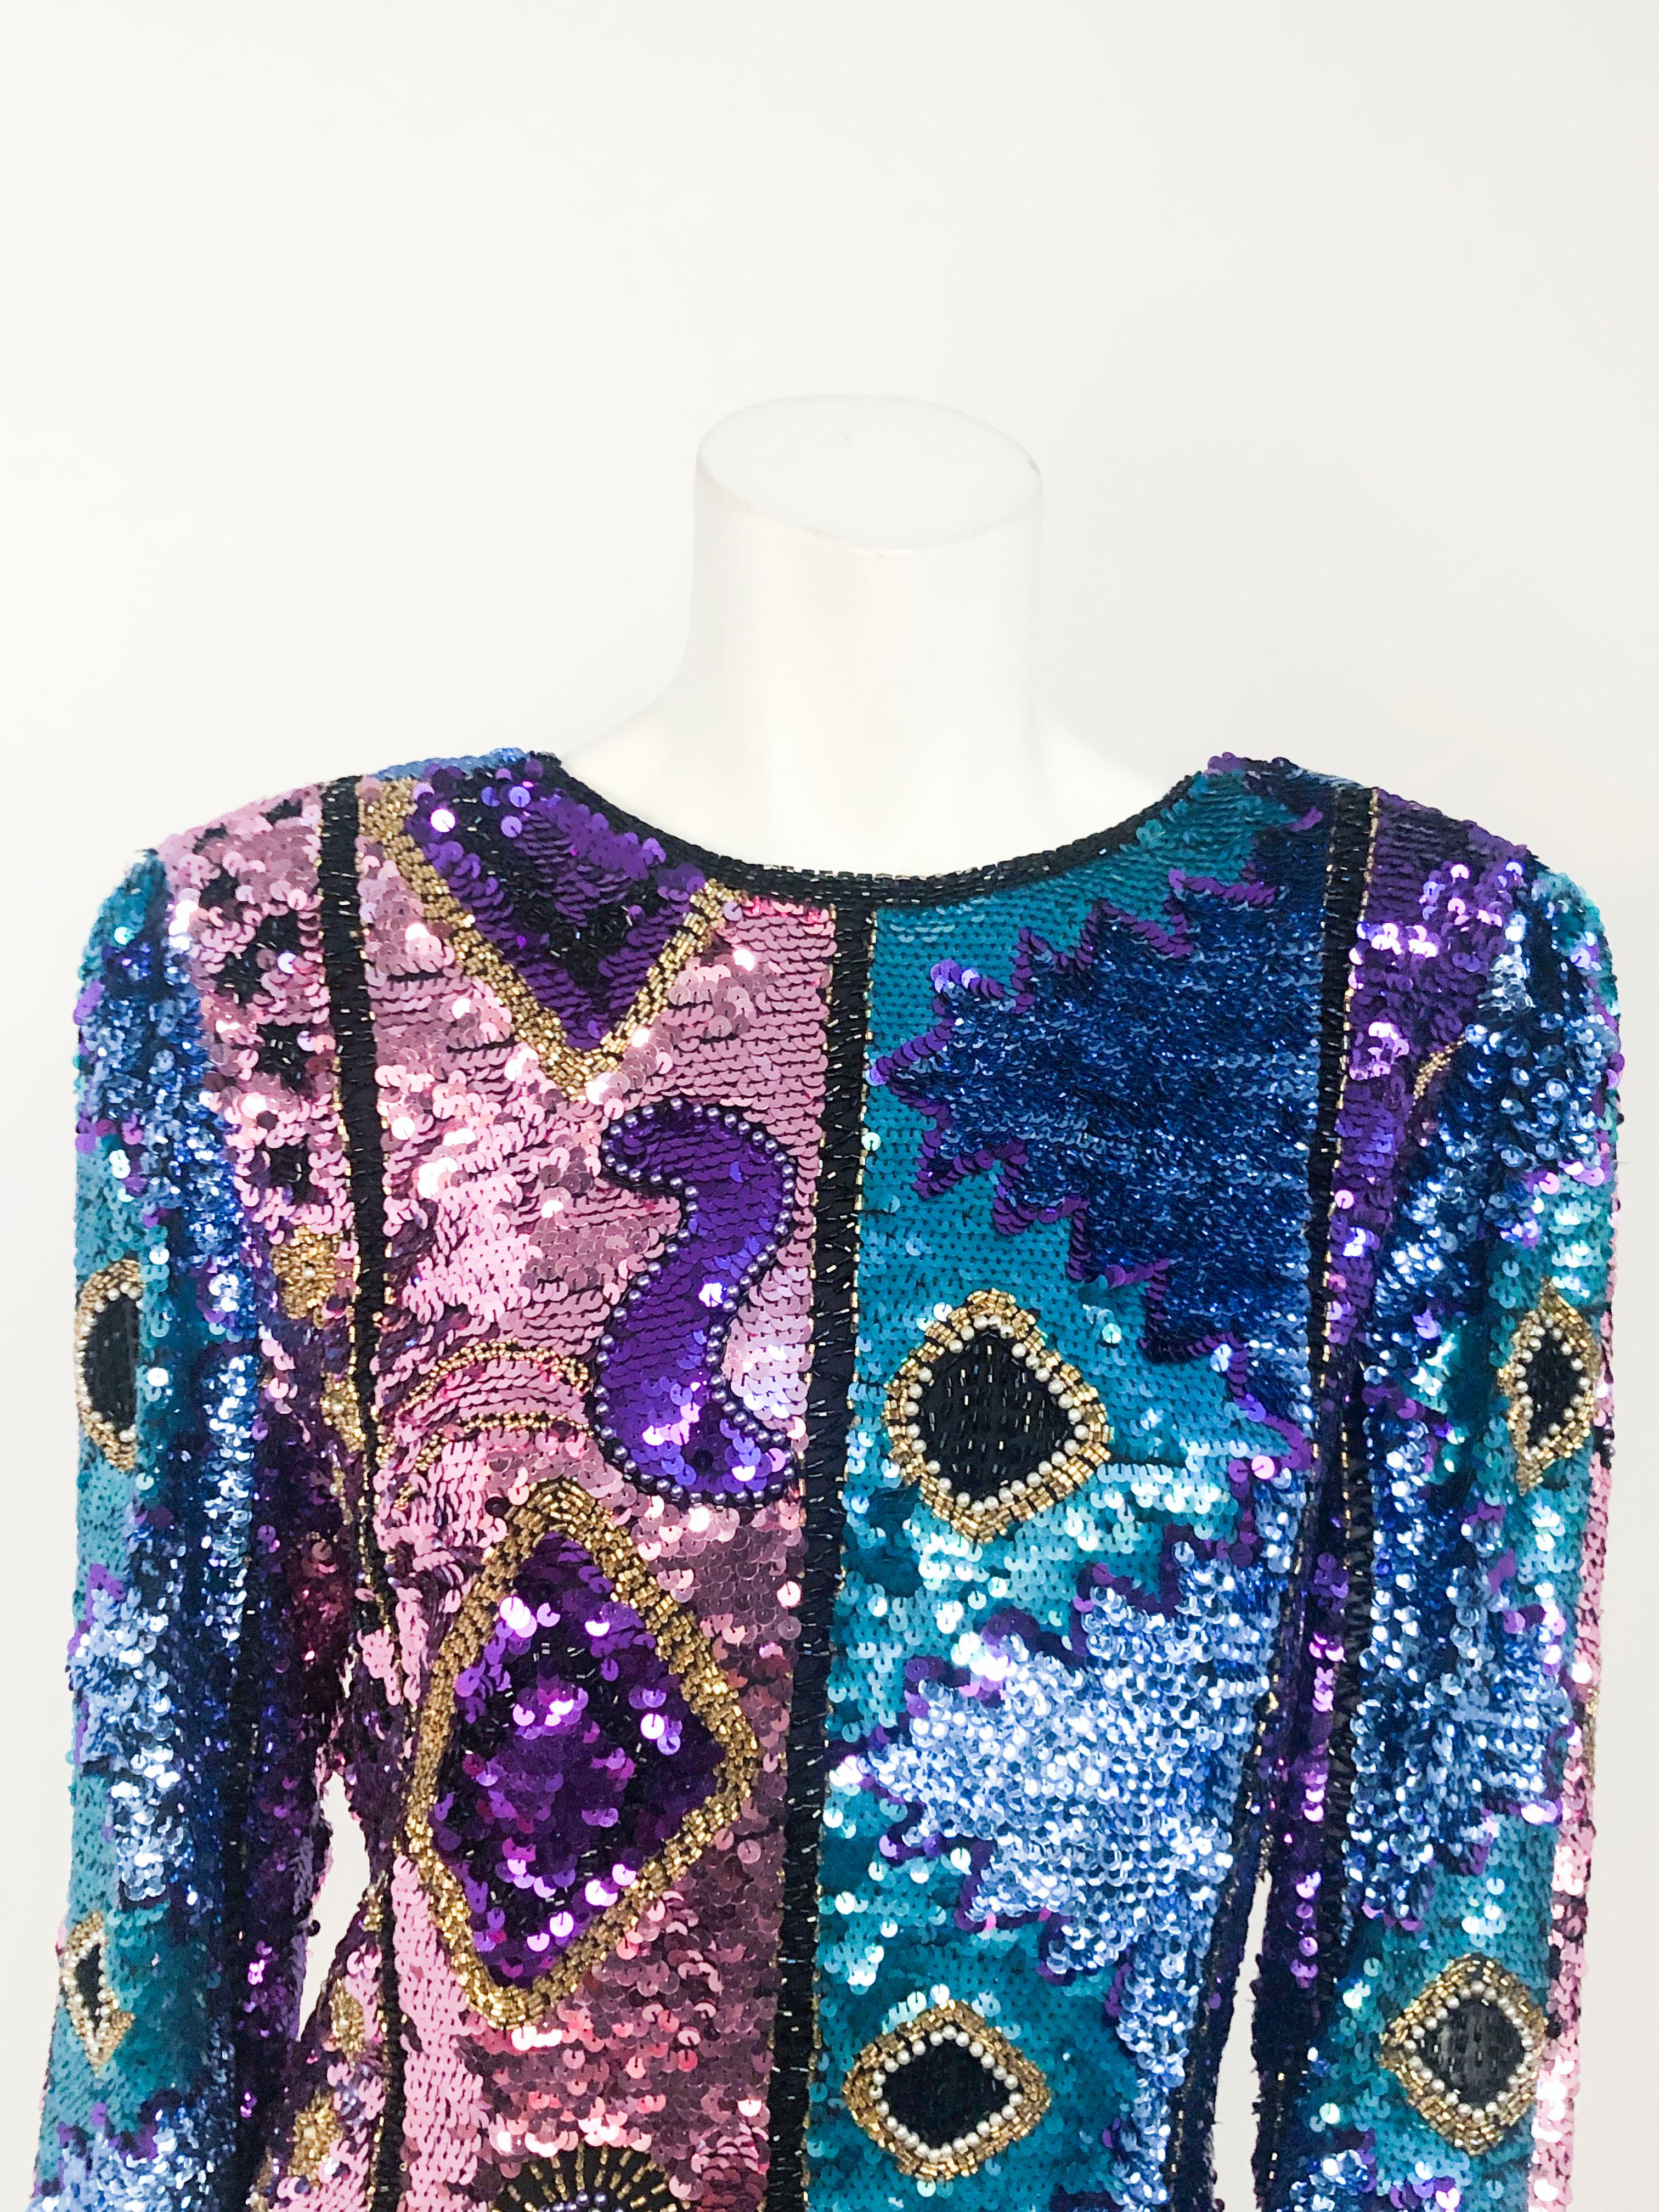 1980s sequin and beaded top with tones of pink, blue, purple, and light blue configured in an abstract/zig zag pattern. The shoulders are structured, and the neckline is high in the front and a V-neck in the back. The garment base is made of a silk